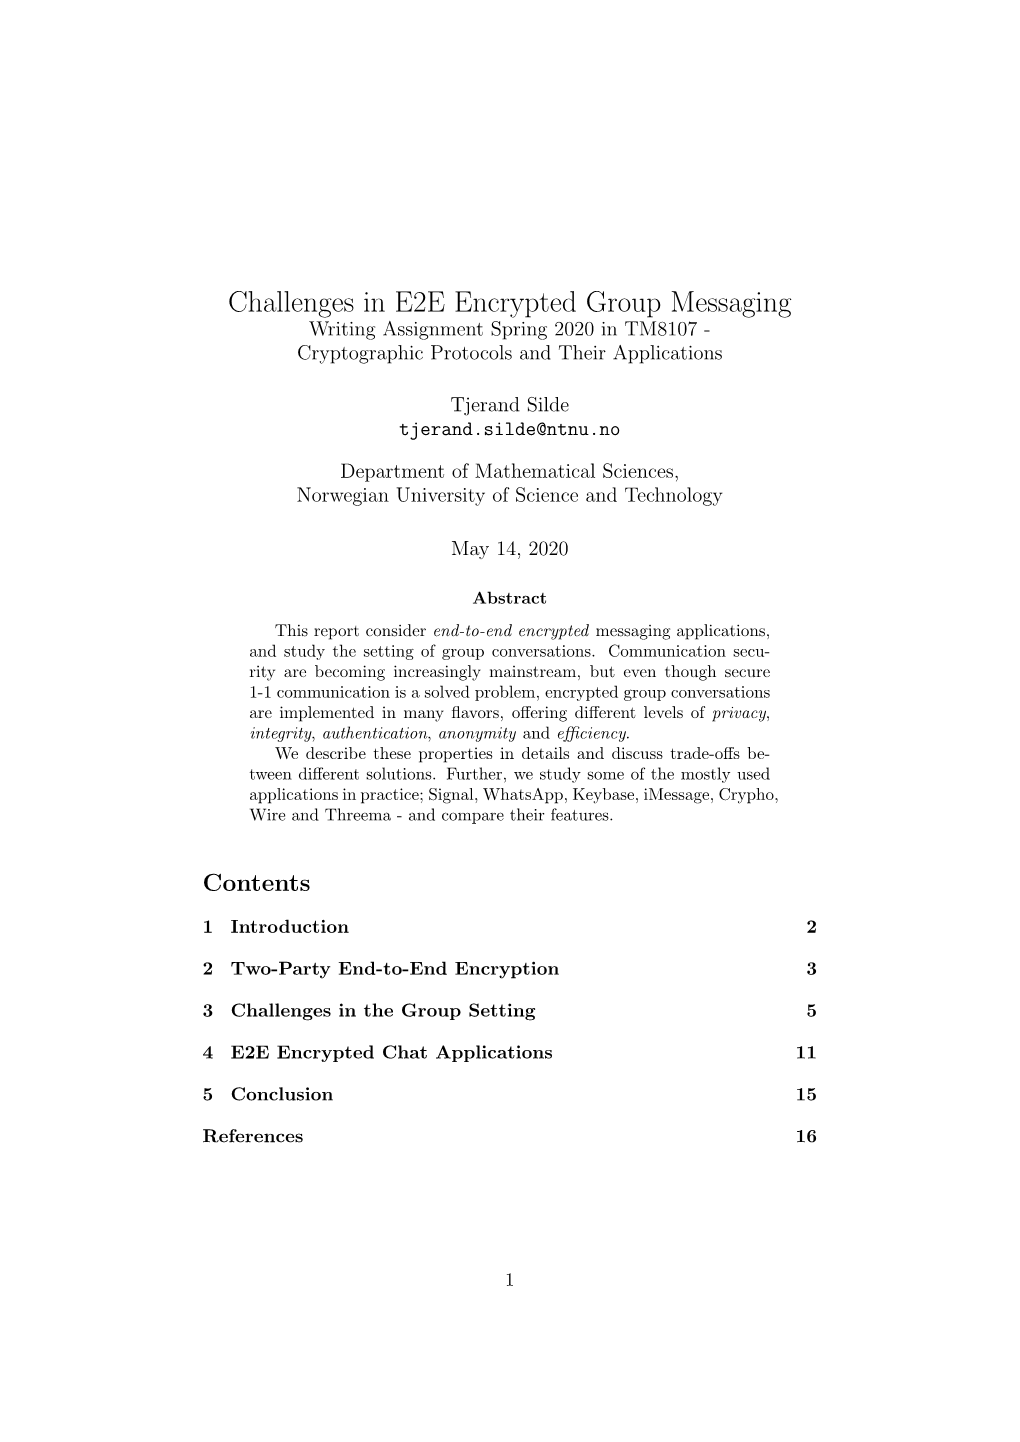 Challenges in E2E Encrypted Group Messaging Writing Assignment Spring 2020 in TM8107 - Cryptographic Protocols and Their Applications